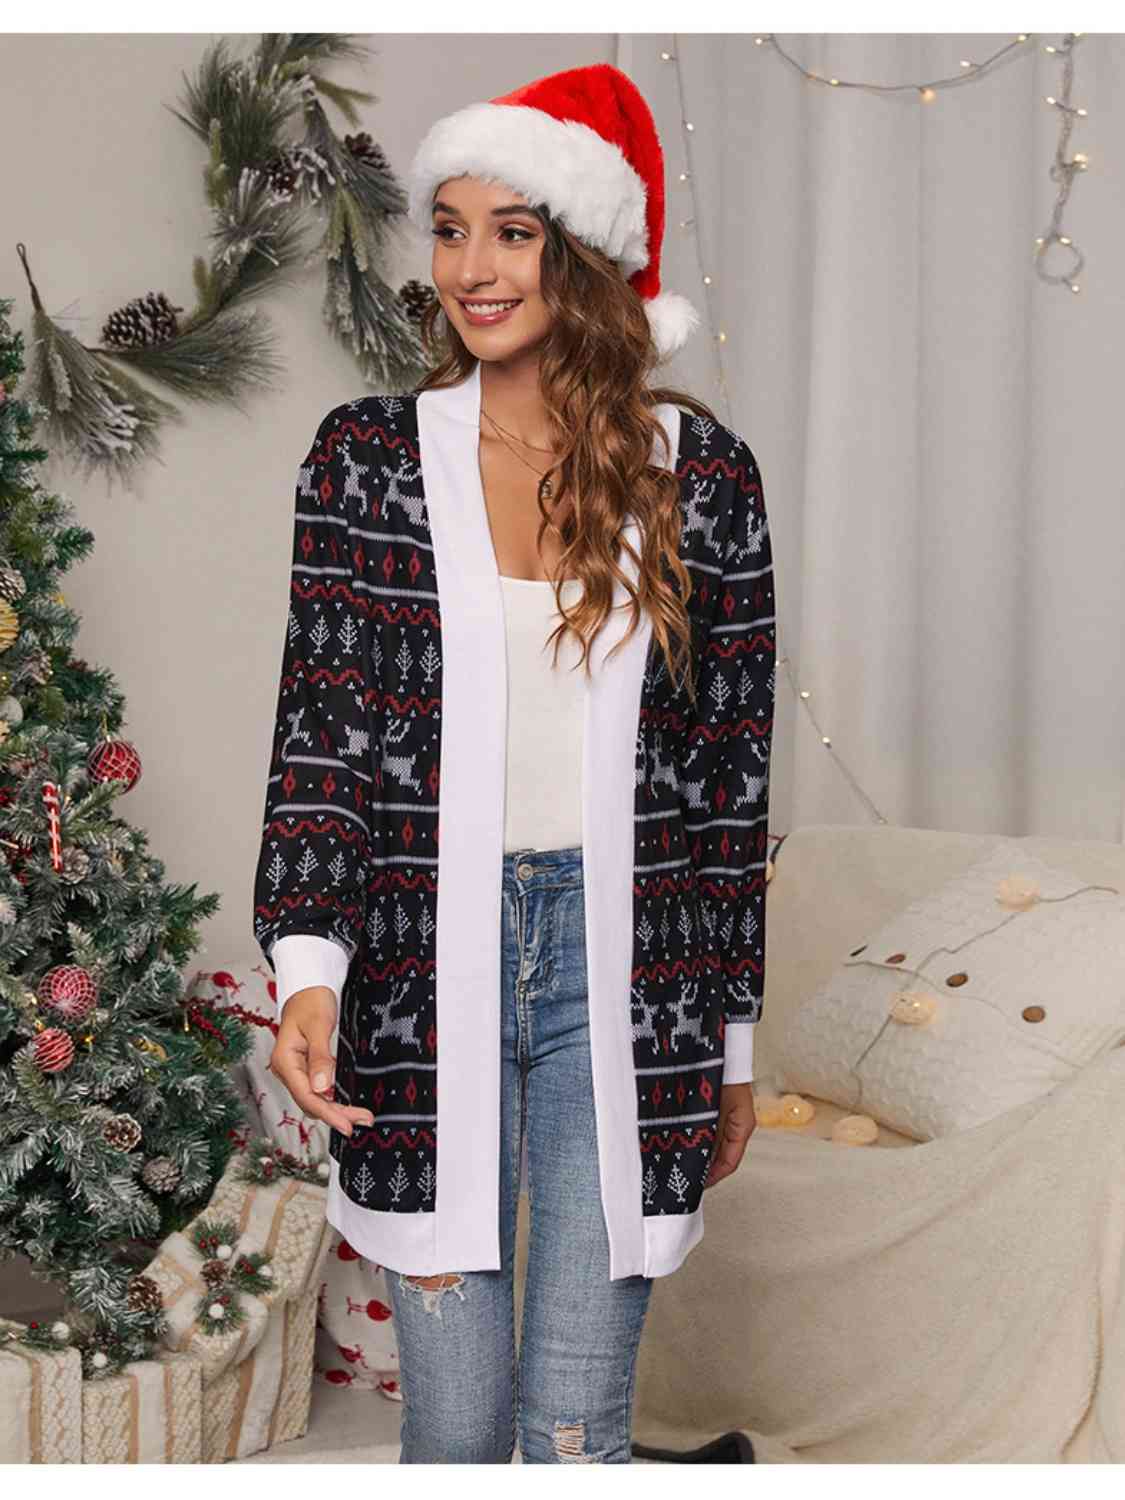 Christmas Open Front Cardigan - Kawaii Stop - Christmas, Christmas Cardigan, Classic Style, Cozy Comfort, Festive Apparel, Holiday Fashion, Holiday Outfit, N@X, Open Front Sweater, Seasonal Wardrobe, Ship From Overseas, Stylish Outerwear, Winter Warmth